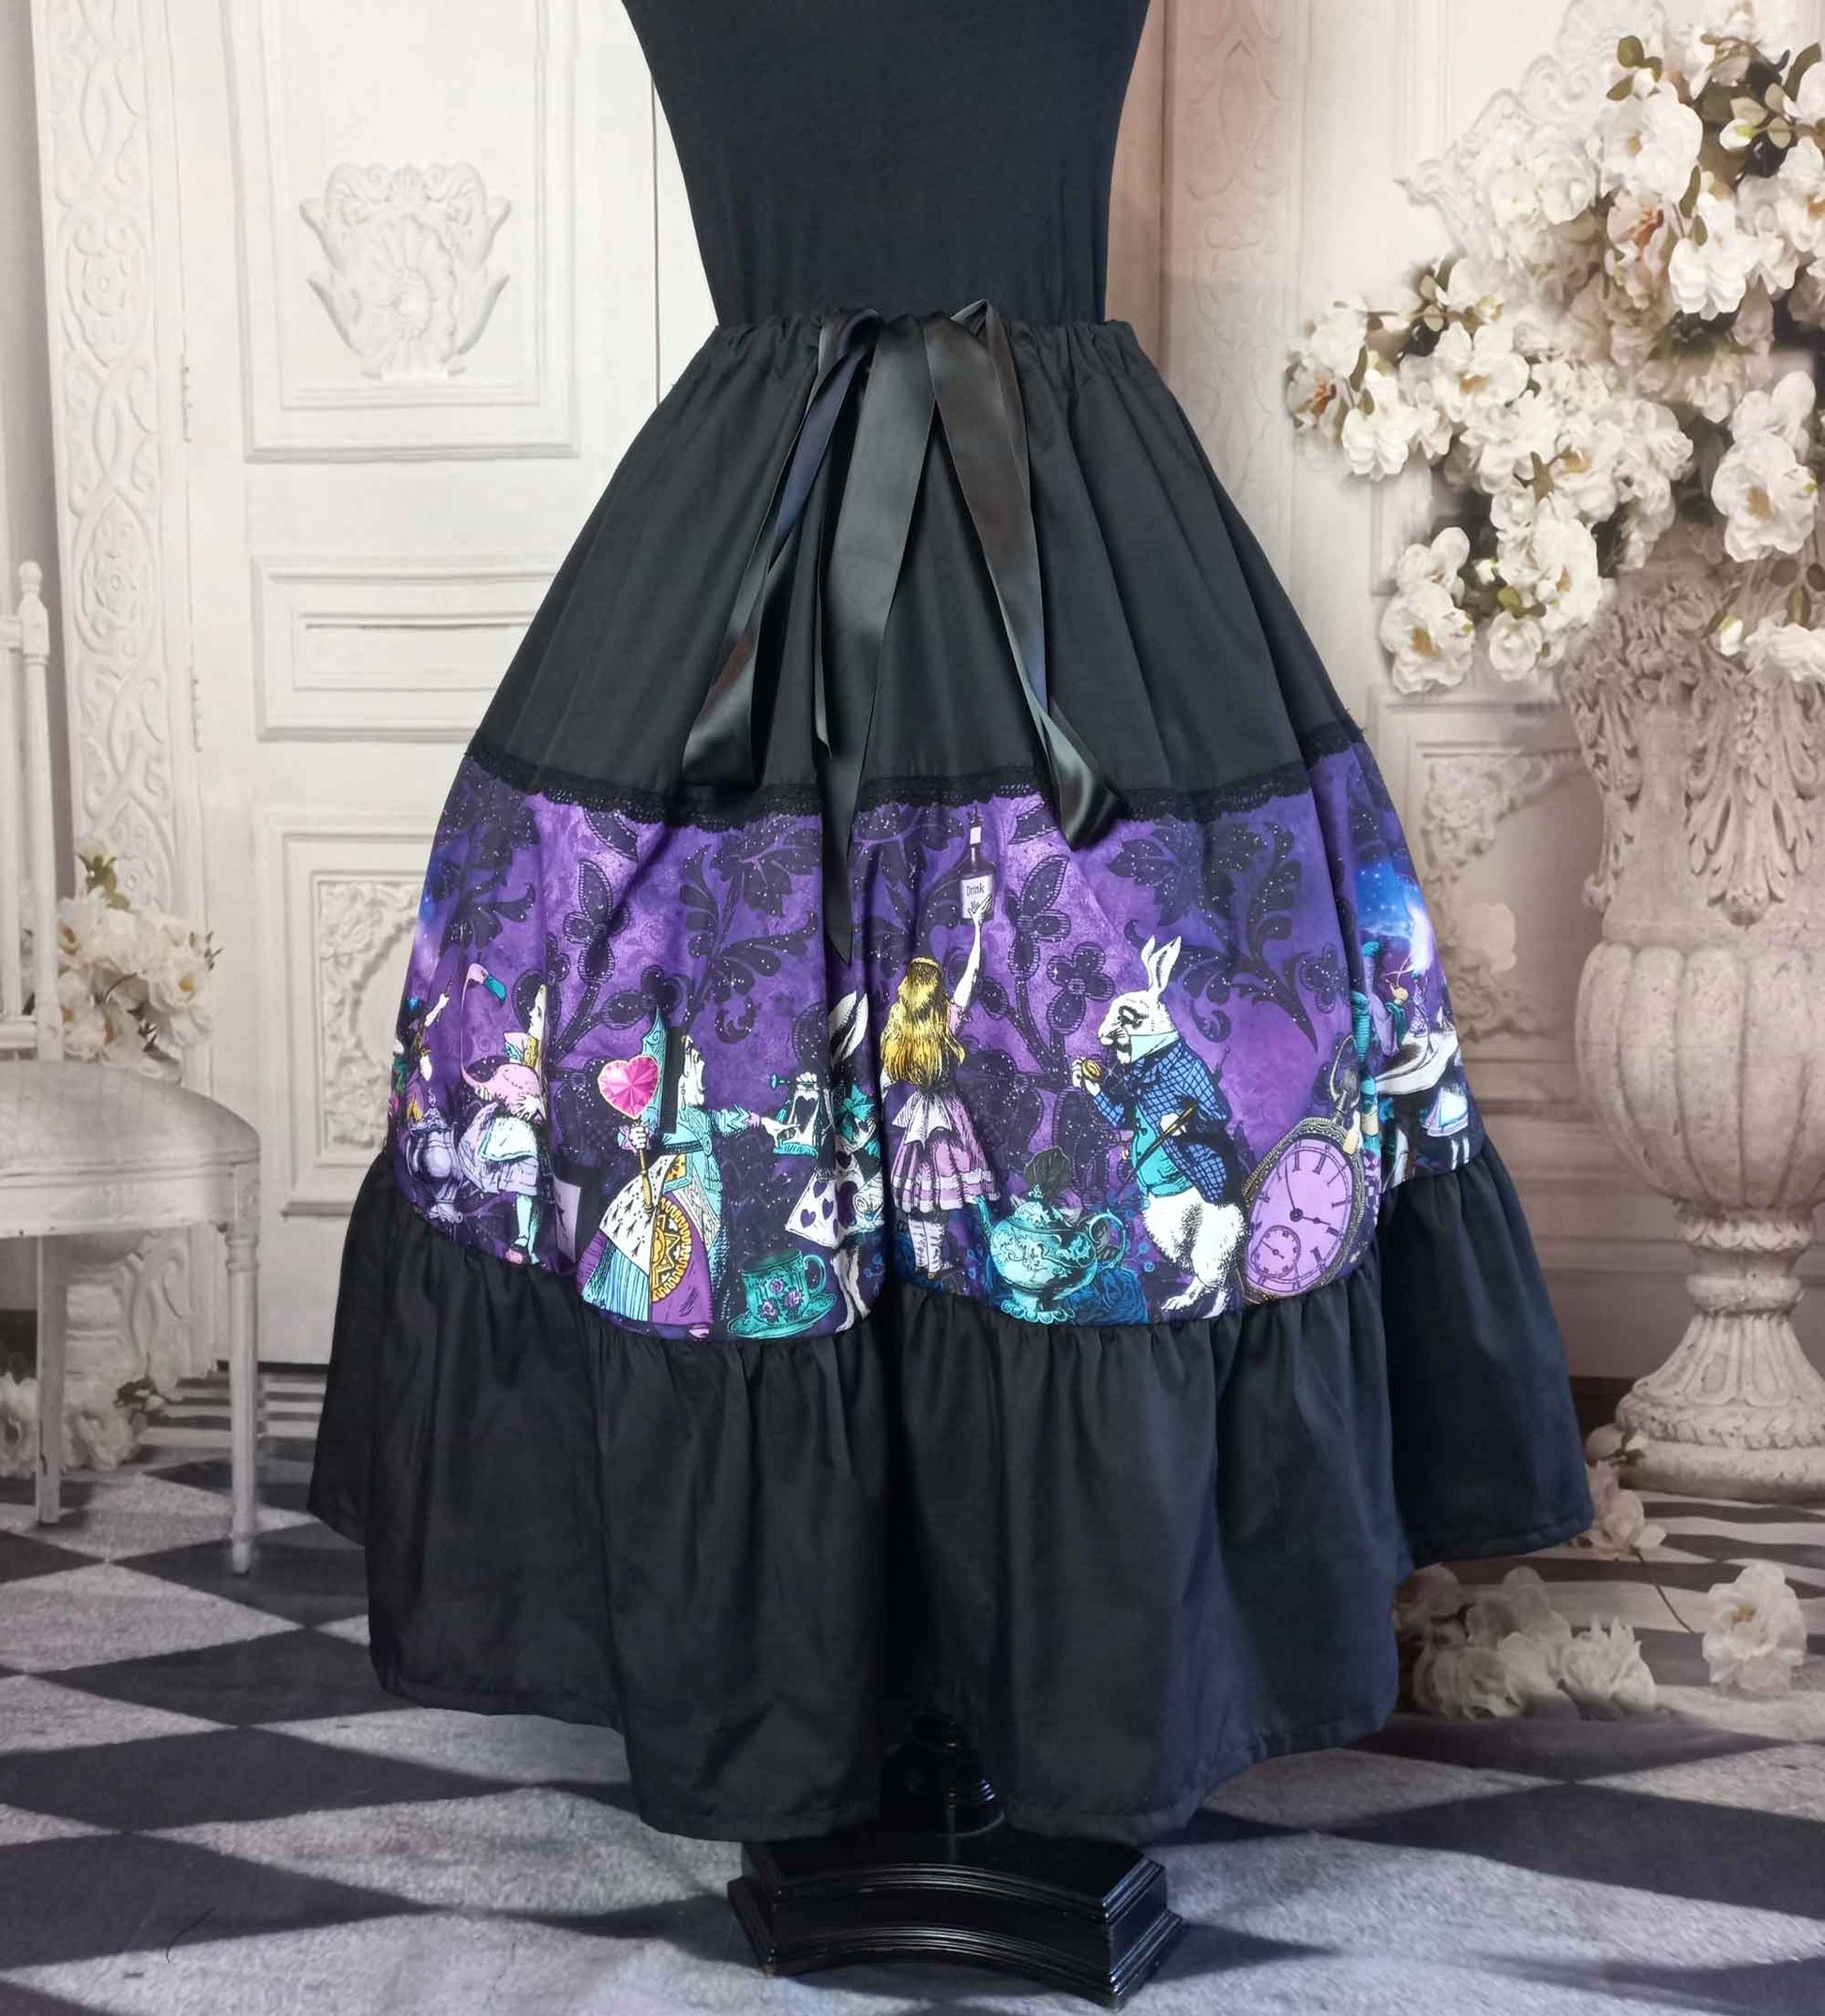 dark purple damask print background overlaid with colourful characters of Alice in Wonderland on a tea length gothic skirt for Mad Hatter Tea Parties